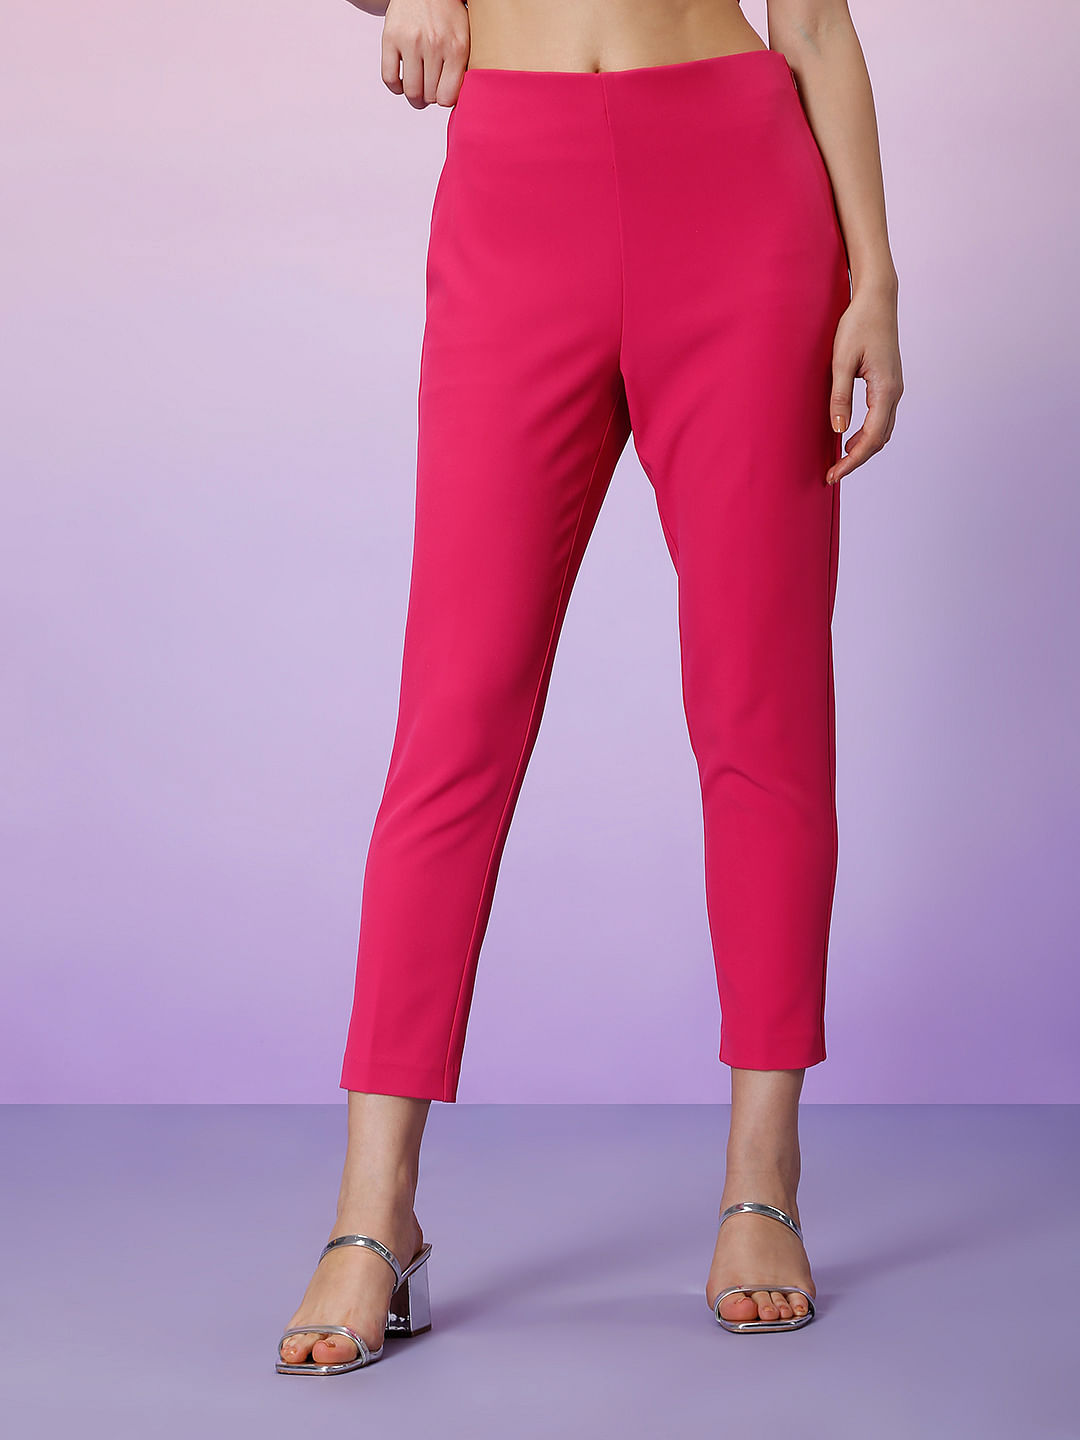 Cotton Plain Women Trouser Pants, Size: 26.0 to 34.0, Model Name/Number:  Red Stripe-z-s-pink at Rs 299/piece in Noida